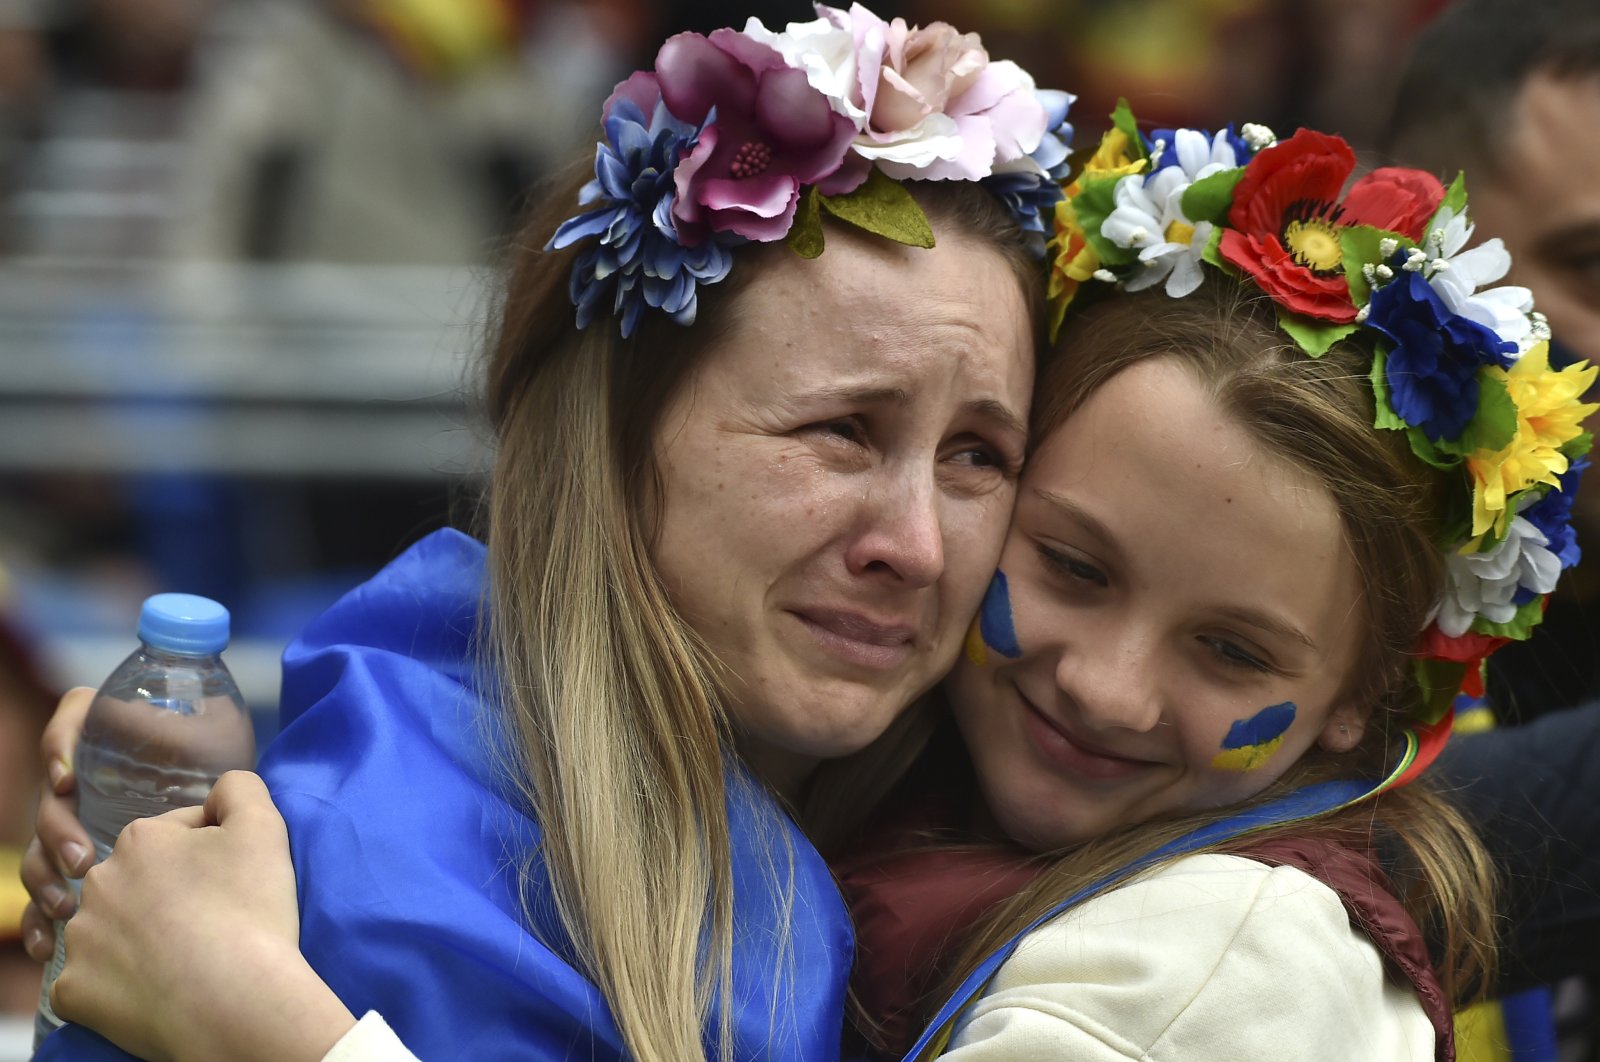 Ukraine fans react before the World Cup 2022 qualifying playoff against Wales, Cardiff, Wales, June 5, 2022. (AP Photo)